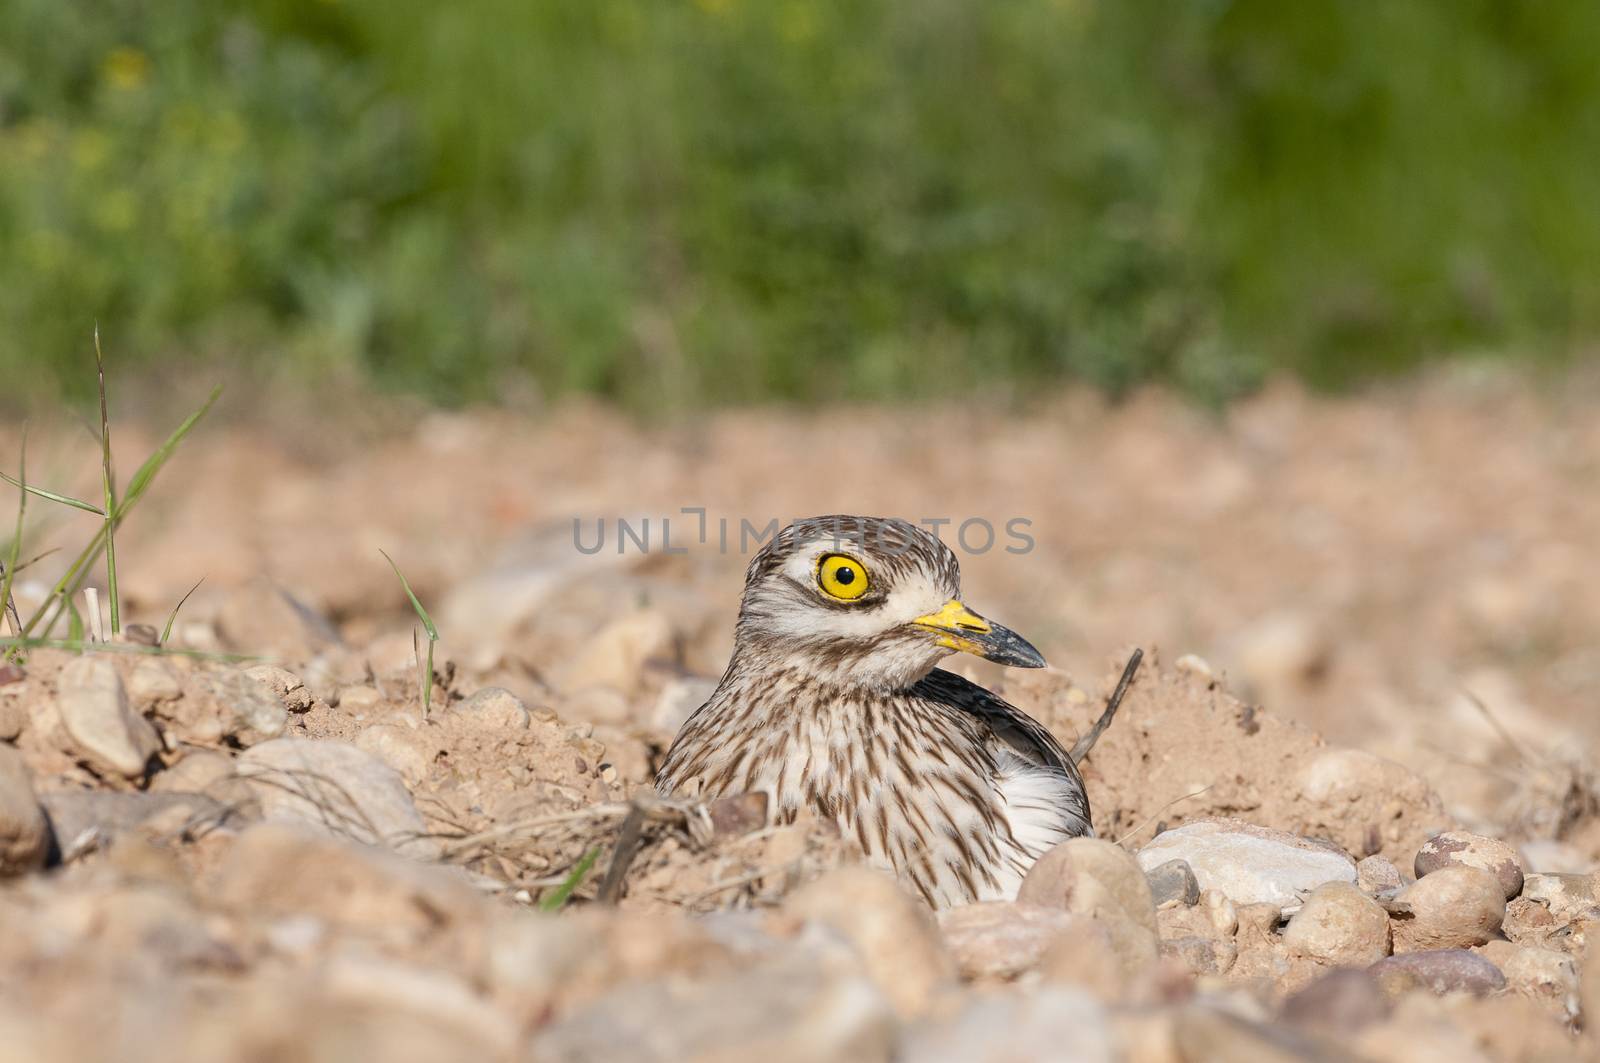 Burhinus oedicnemus (Eurasian thick knee, Eurasia Stone-curlew, Stone Curlew) resting on the ground